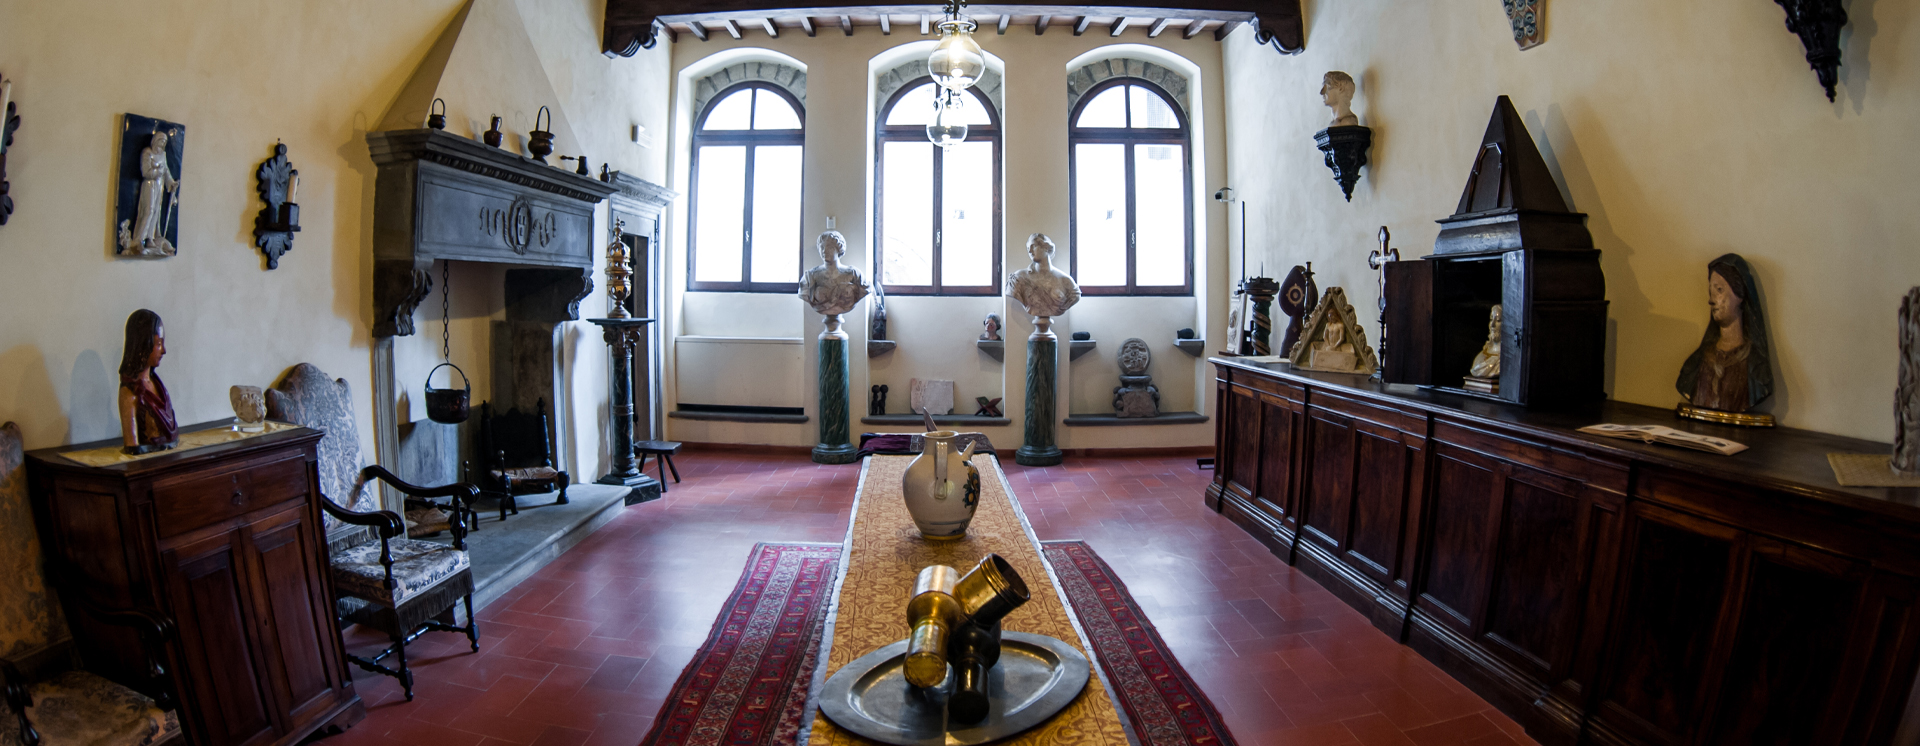 Image of the Casa Museo Ivan Bruschi inside